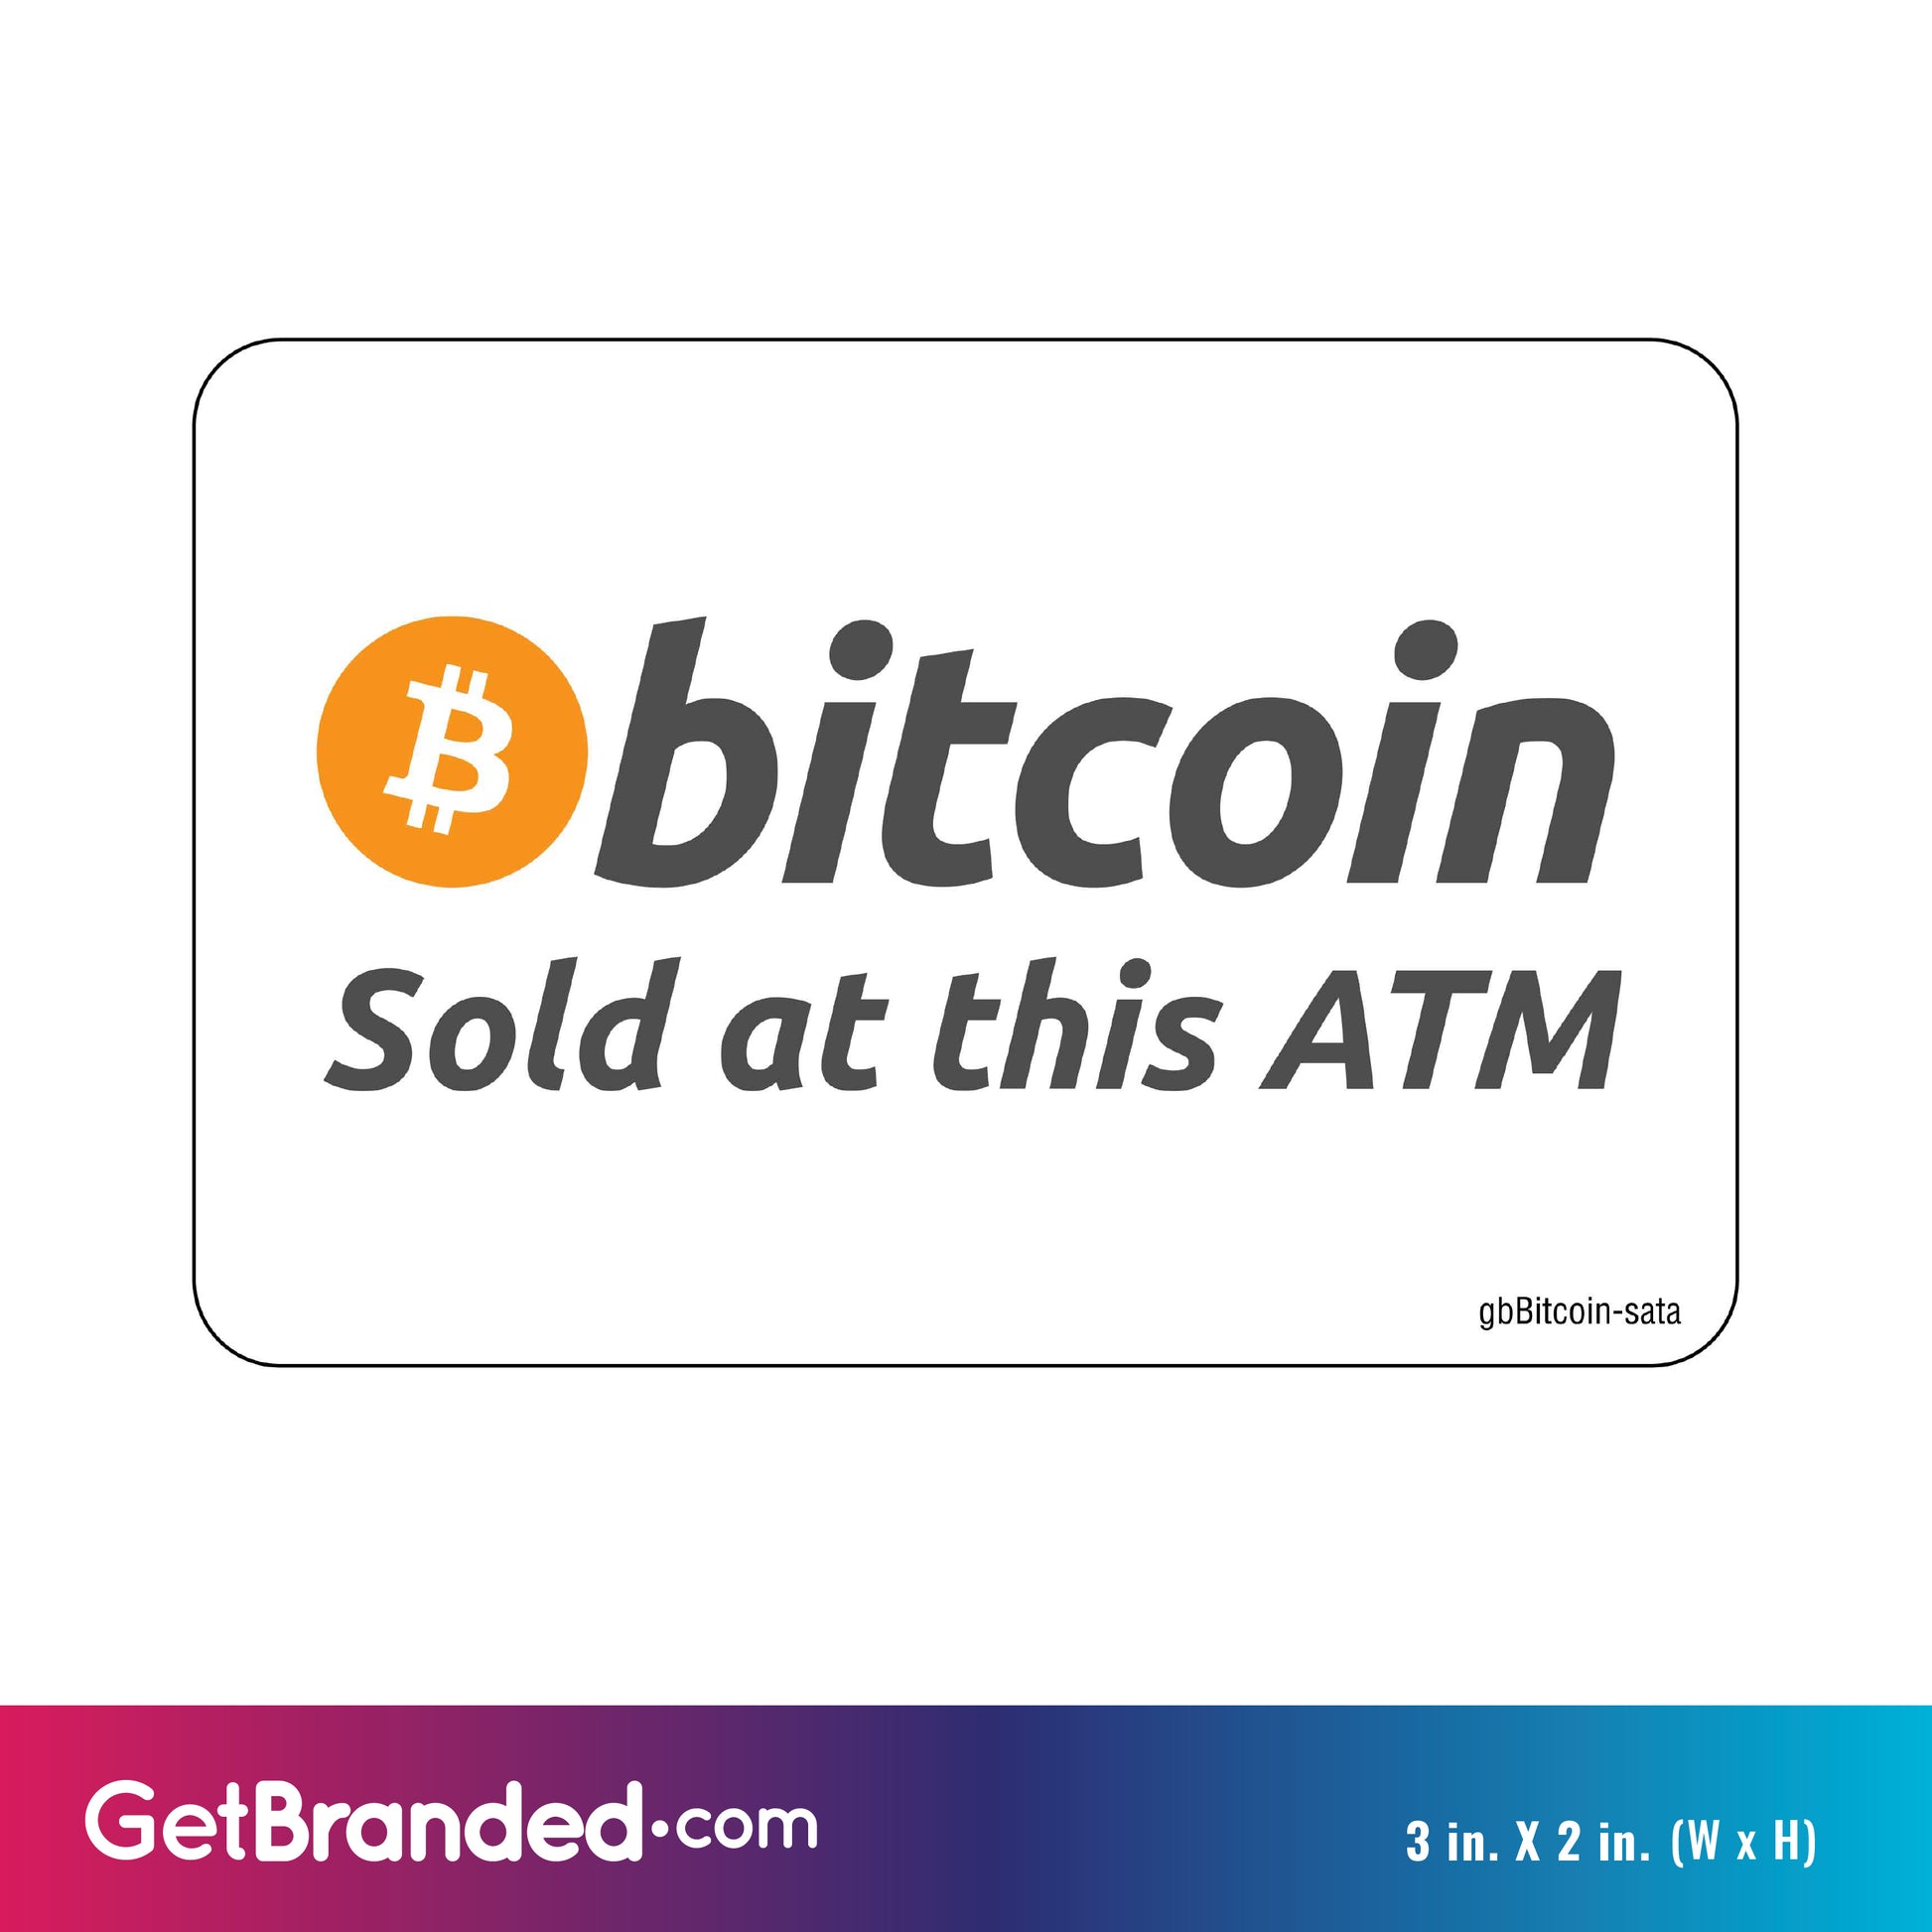 Bitcoin Sold at This ATM Decal size guide. 3 inches by 2 inches in size.